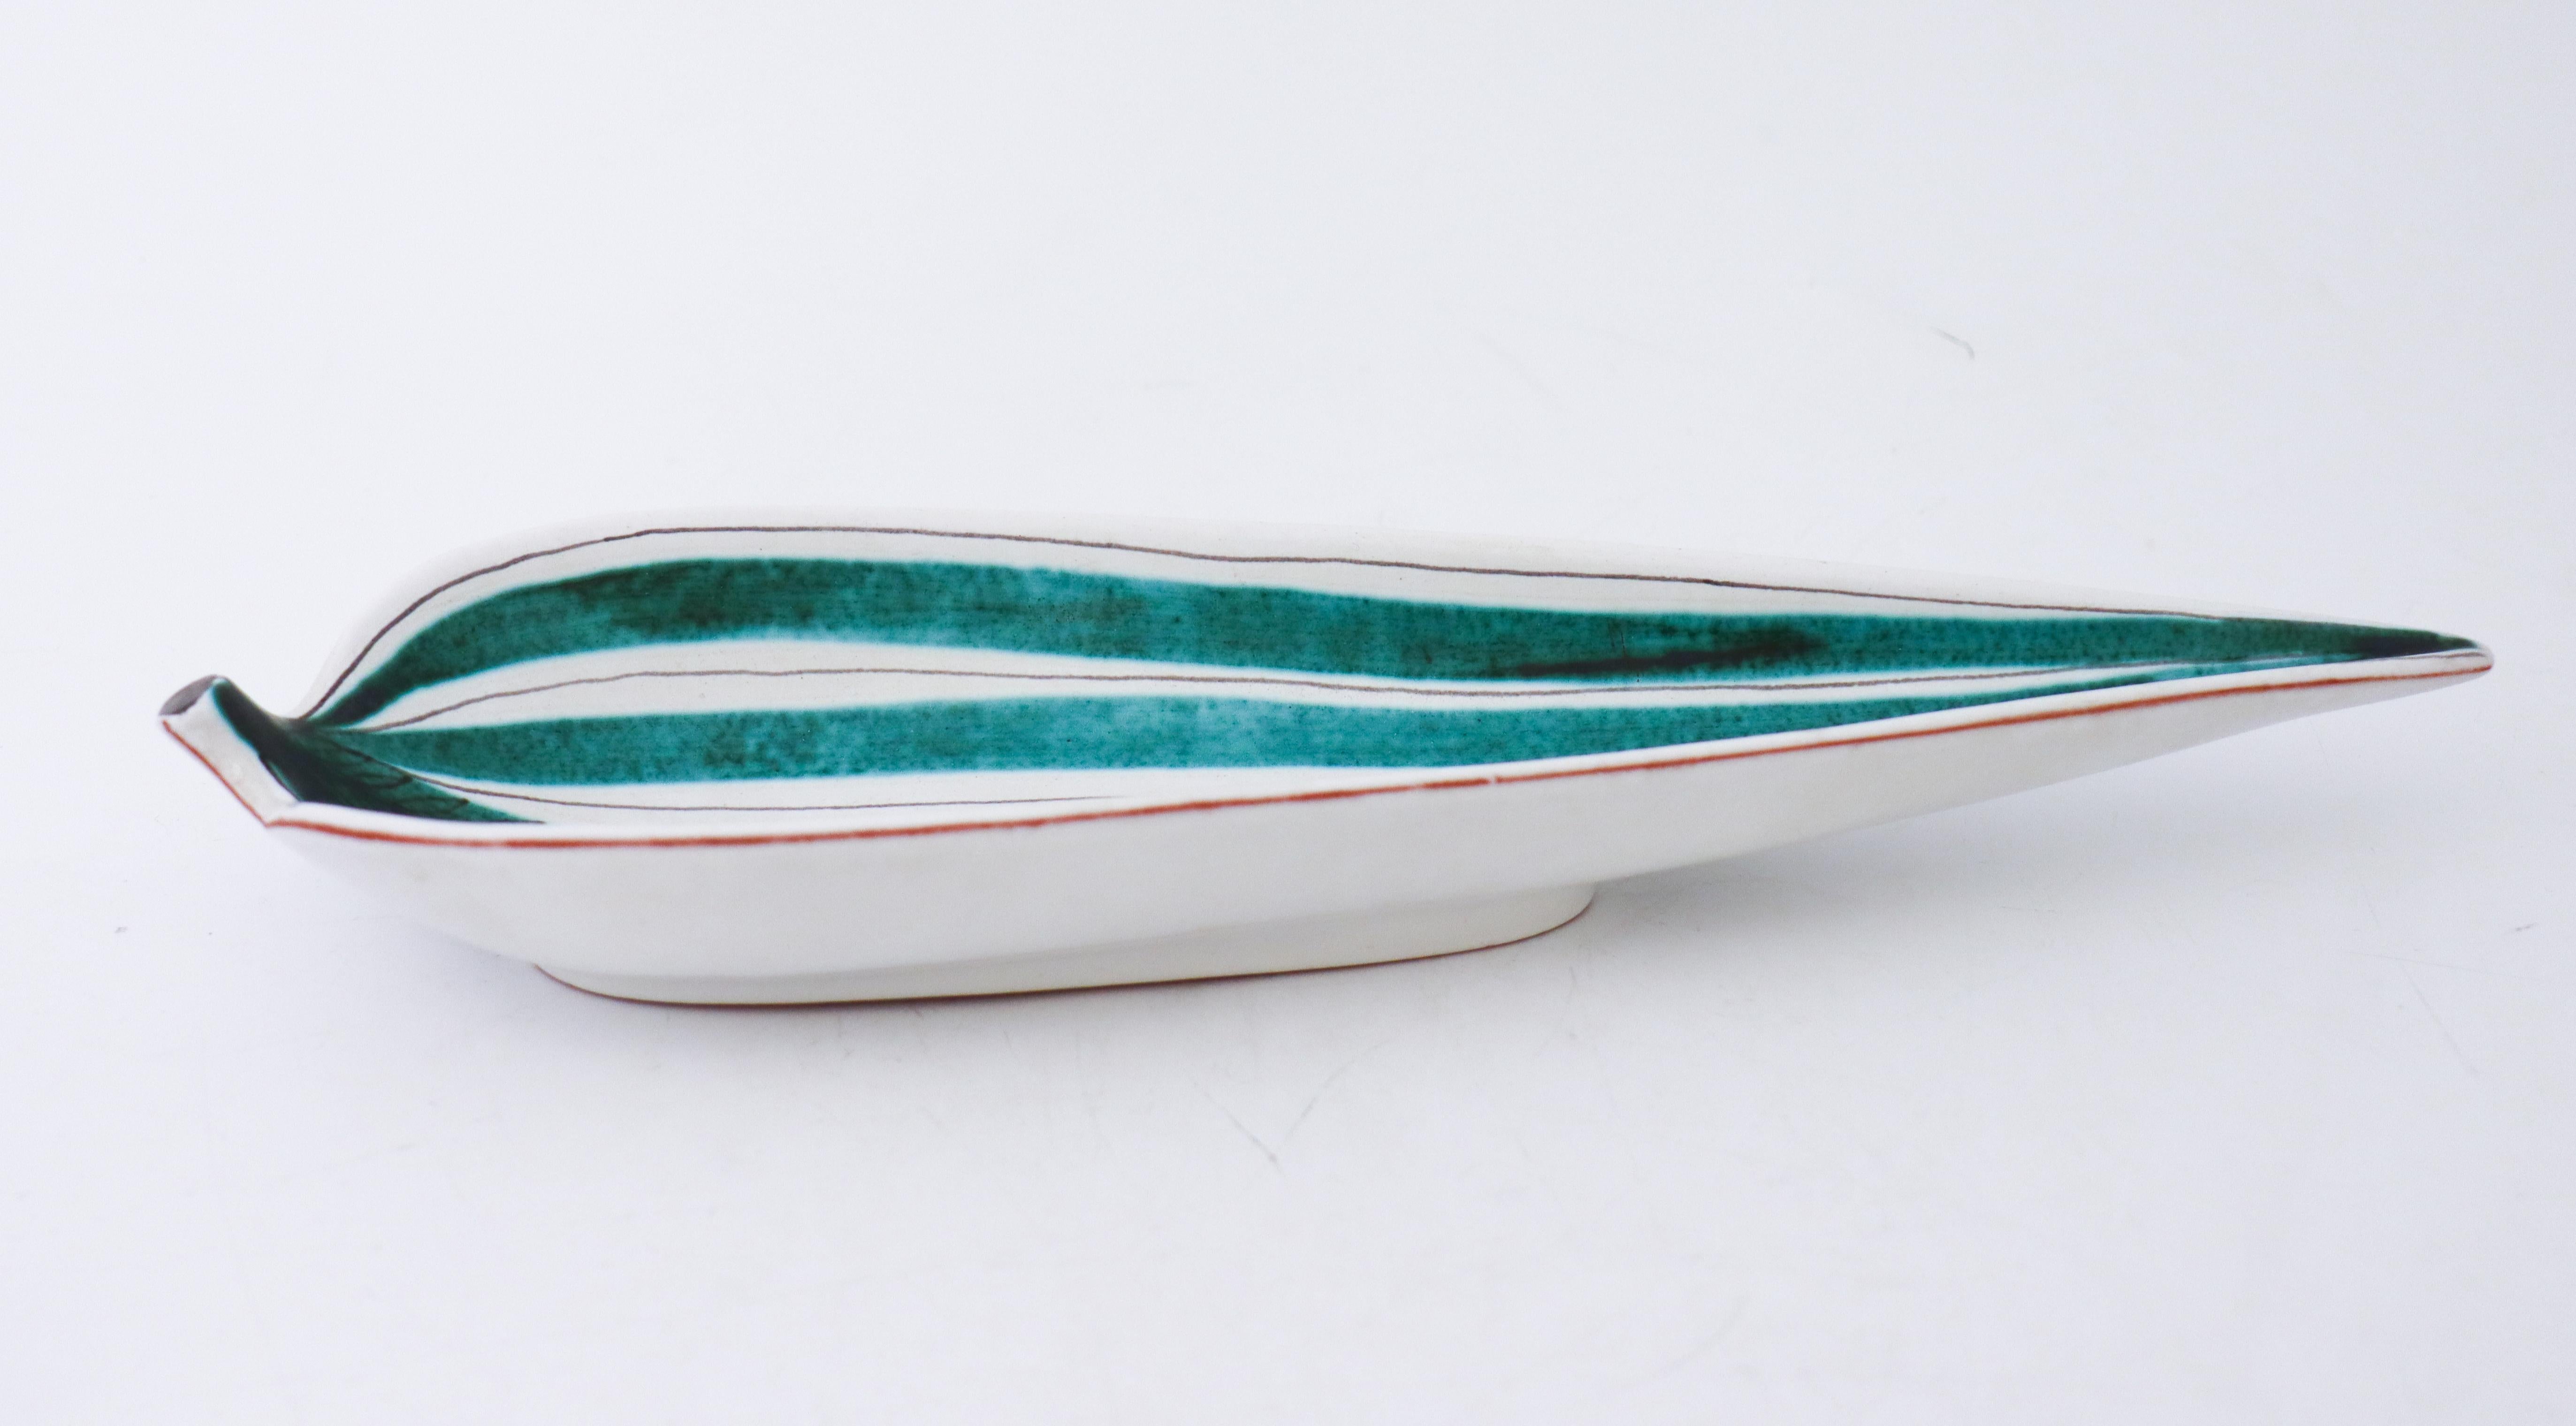 A serving dish in faience designed by Stig Lindberg at Gustavsbergs Studio in Stockholm, it is 31.5 x 10.5 cm (12.6